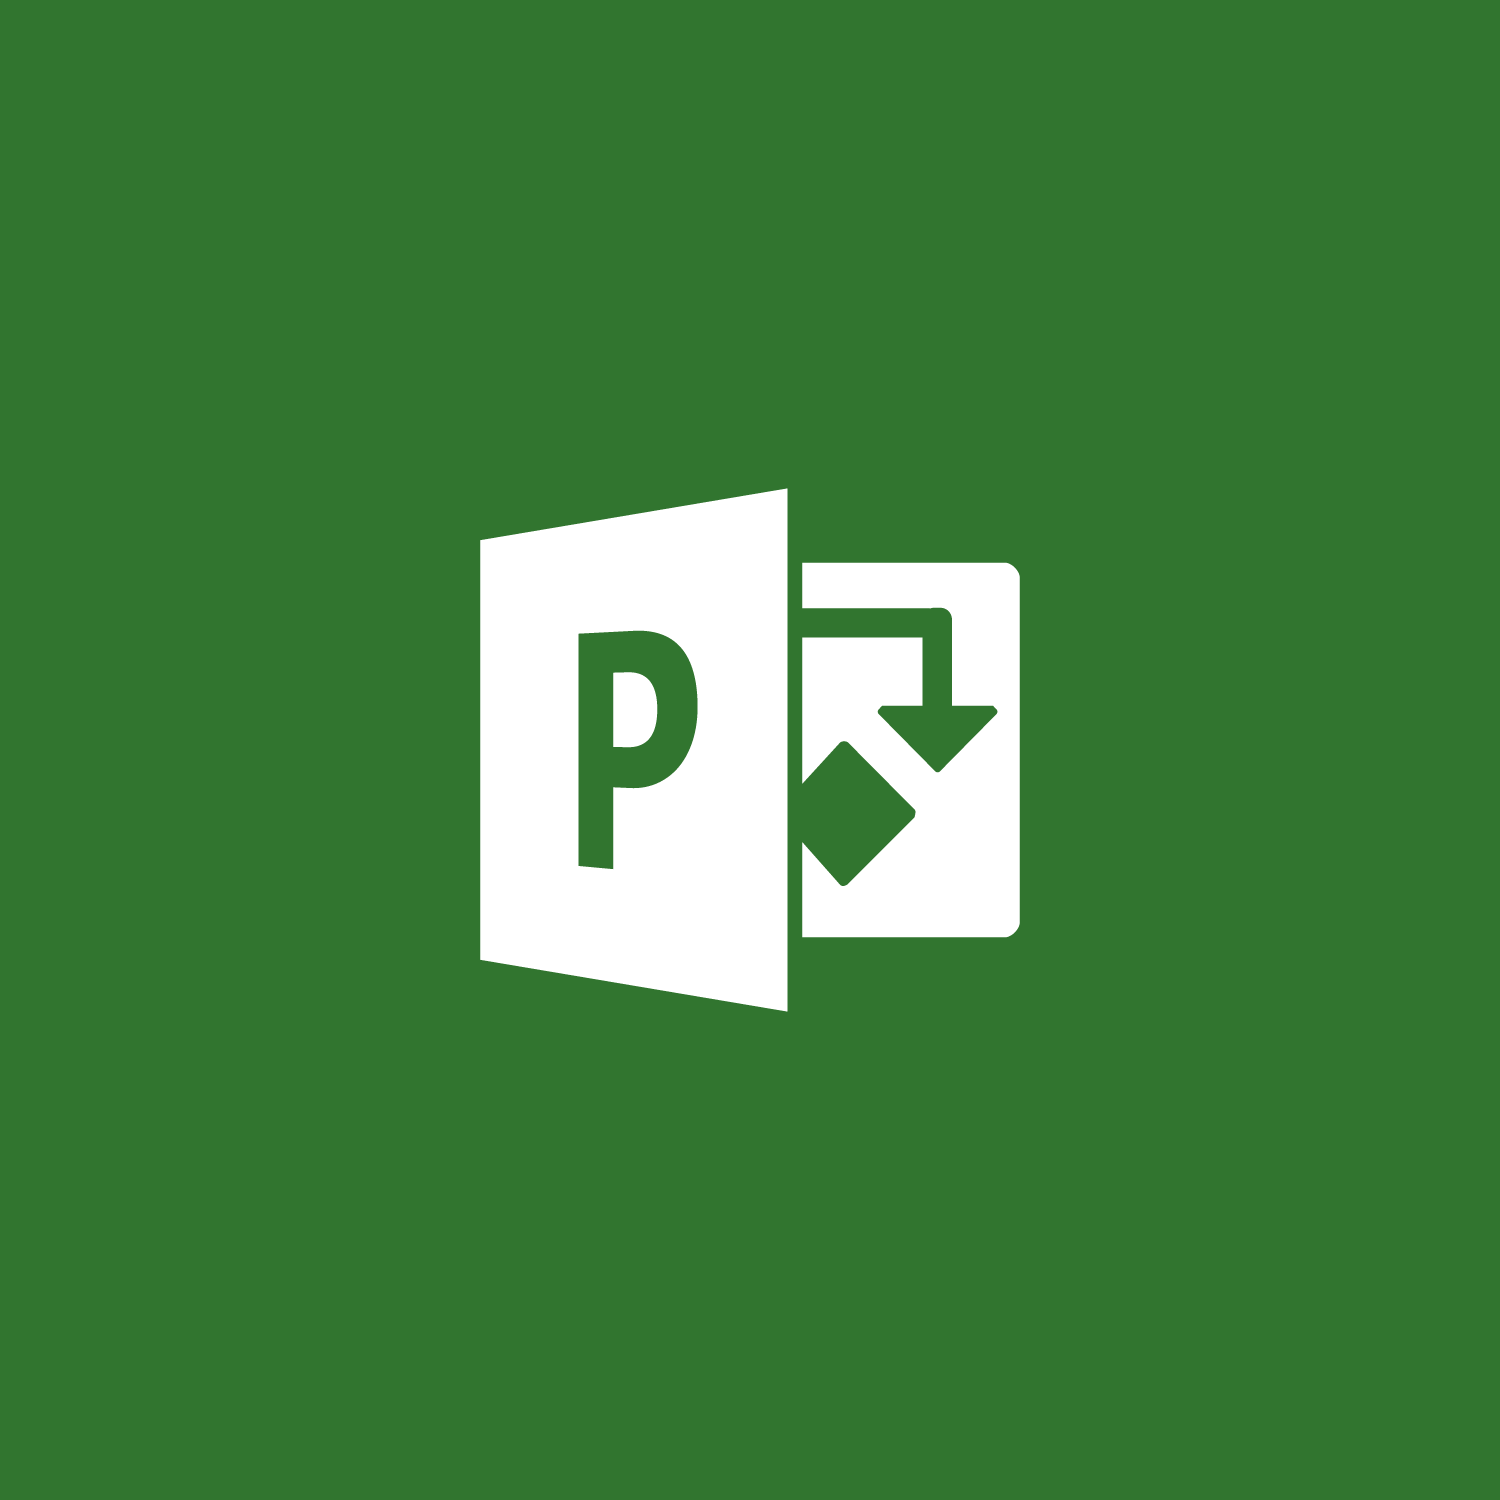 Microsoft-Project-Pro-Crack-2019-Product-Key-Download.png